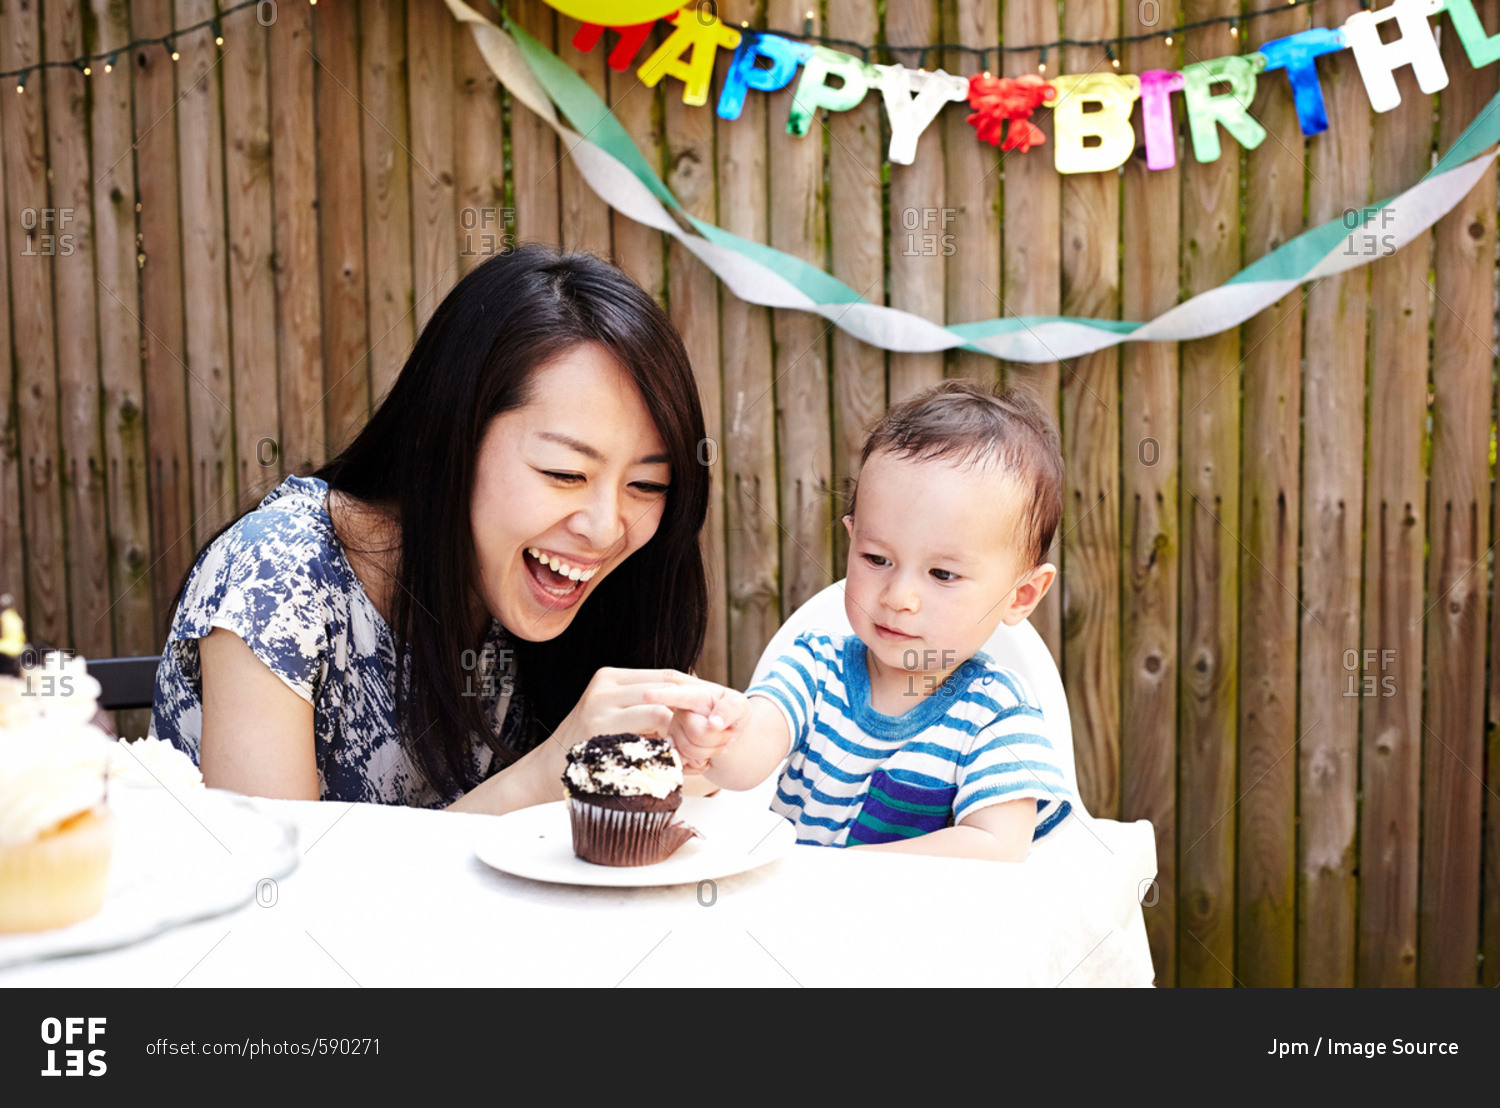 Mother and baby boy smiling with birthday cake